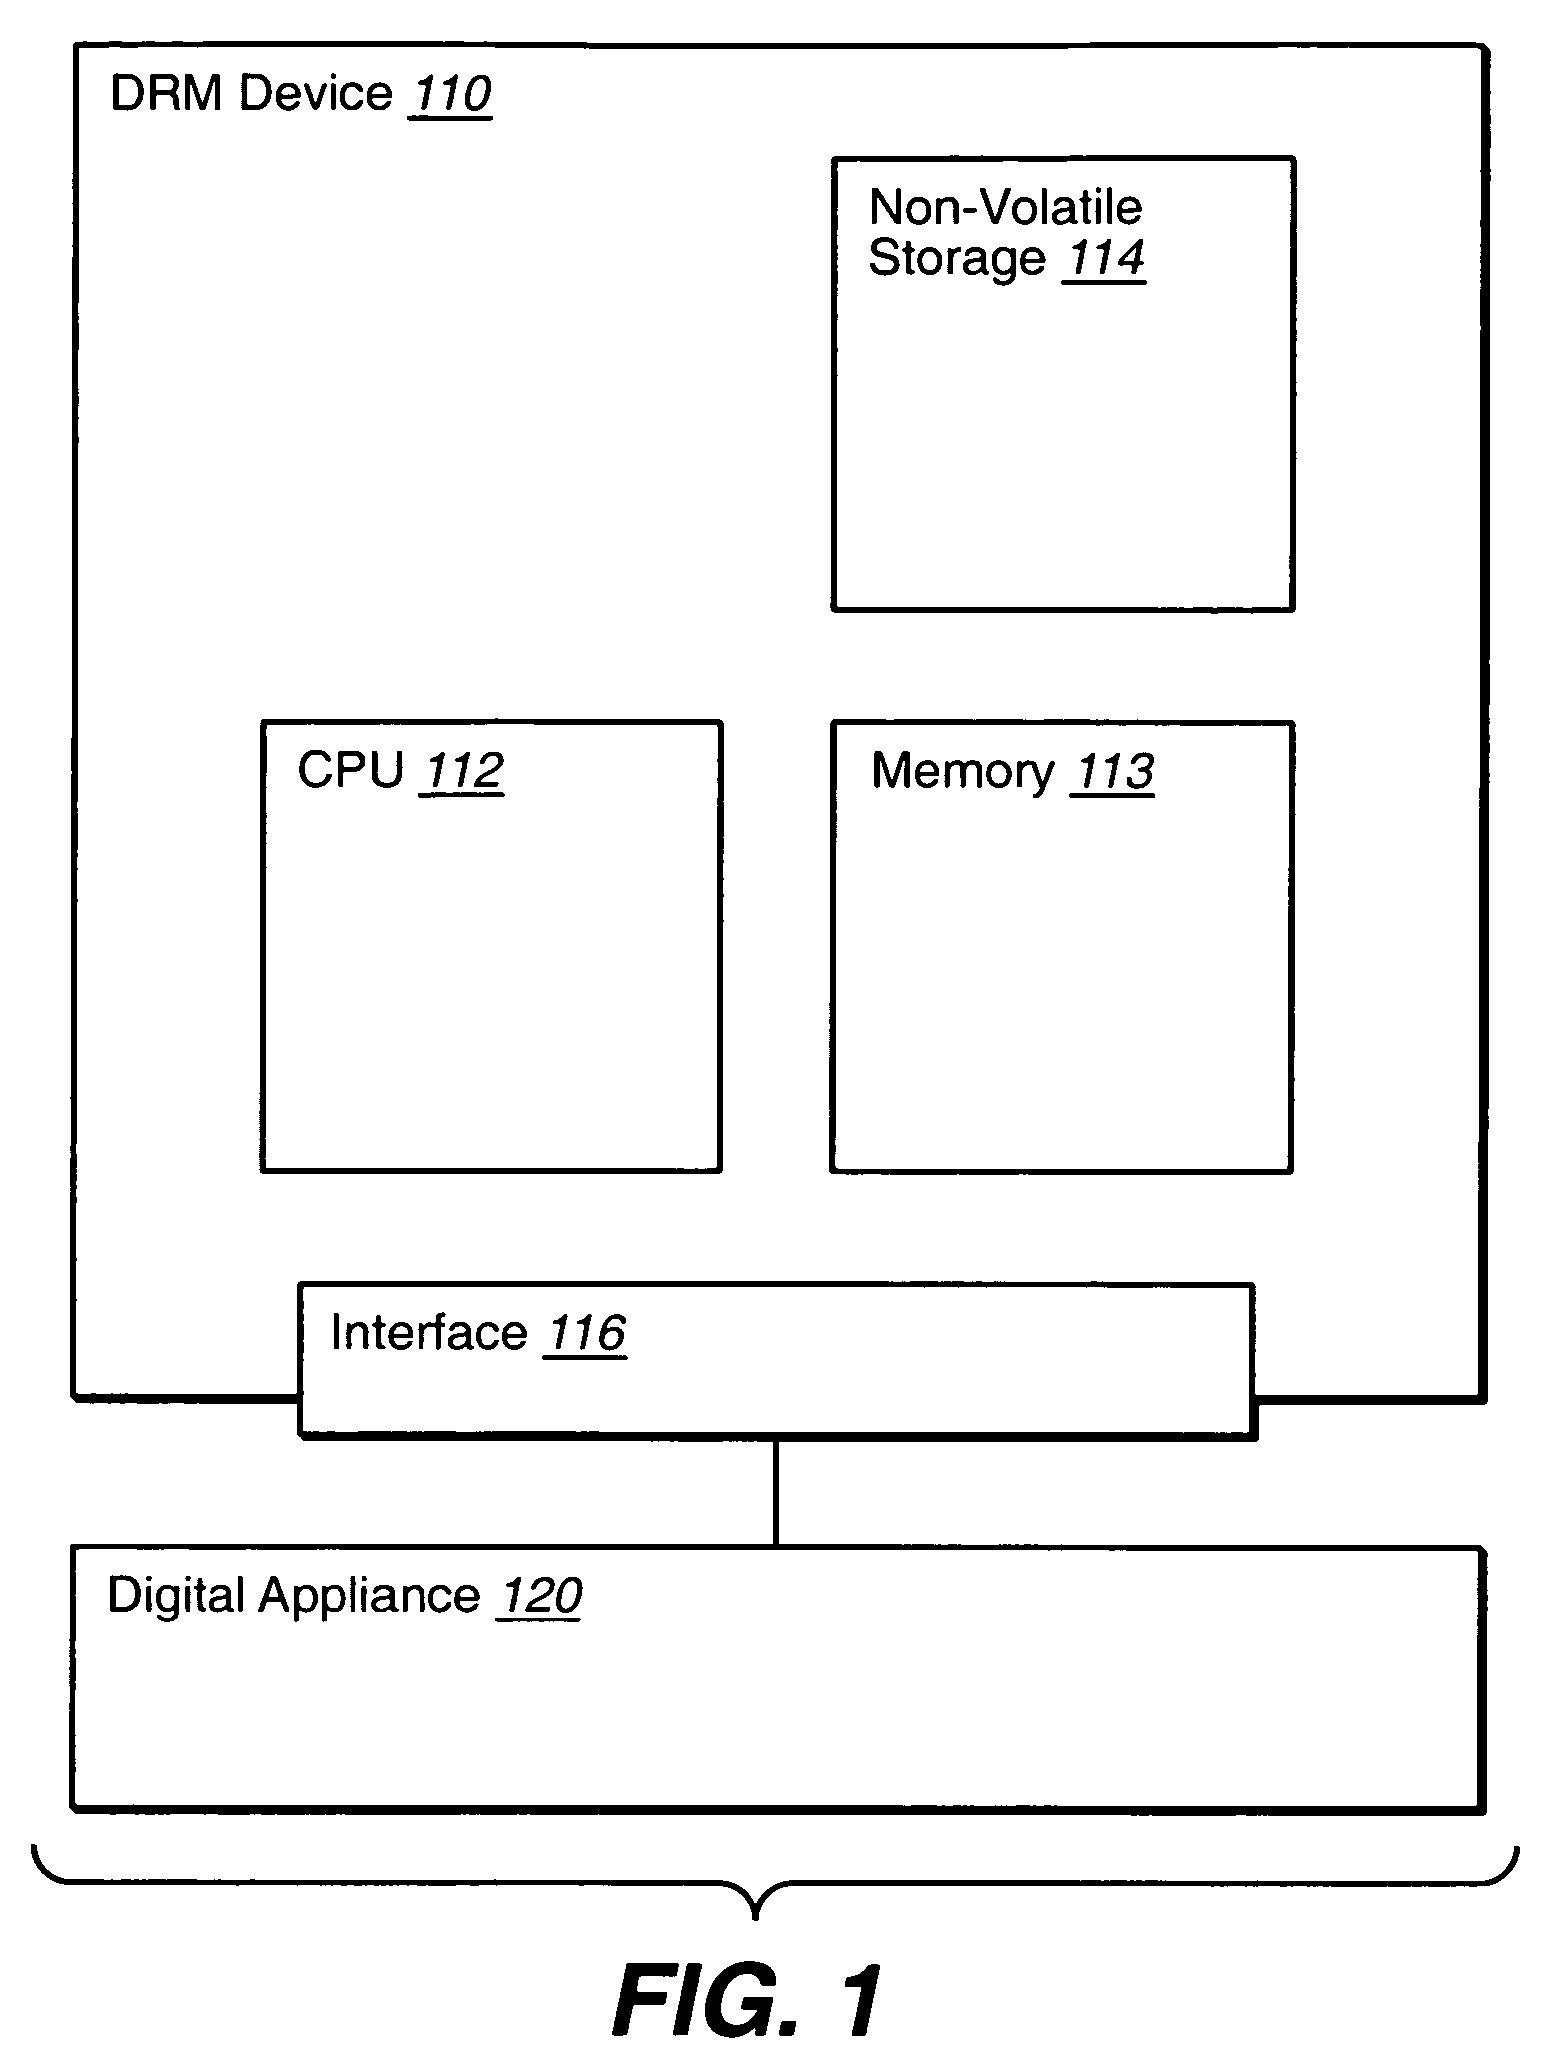 Apparatus, system and method for securing digital documents in a digital appliance